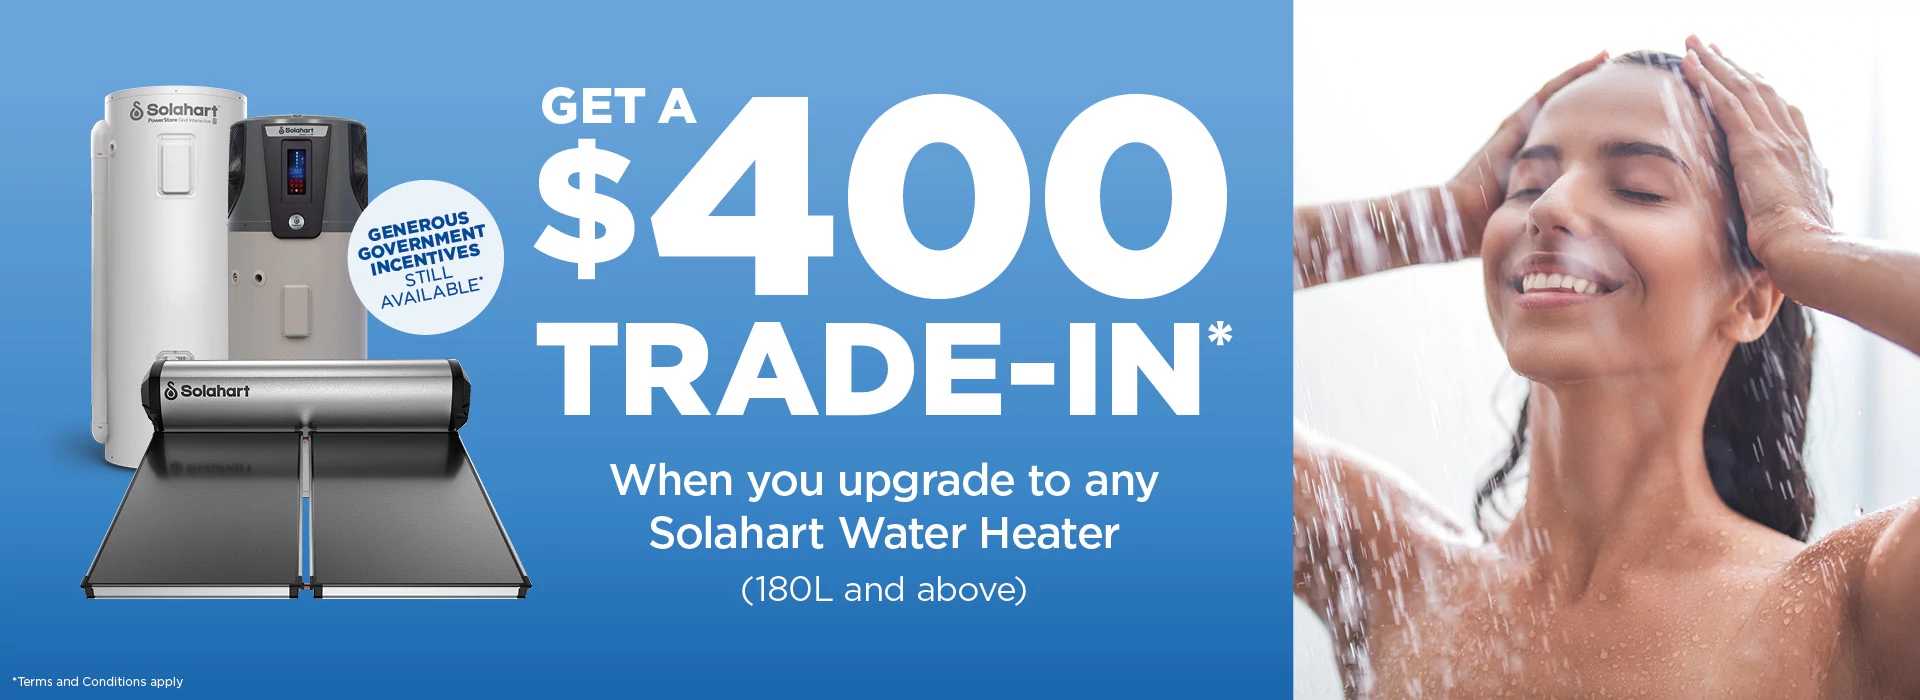 Save upfront with a $400 trade in when you upgrade to a Solahart hot water heater